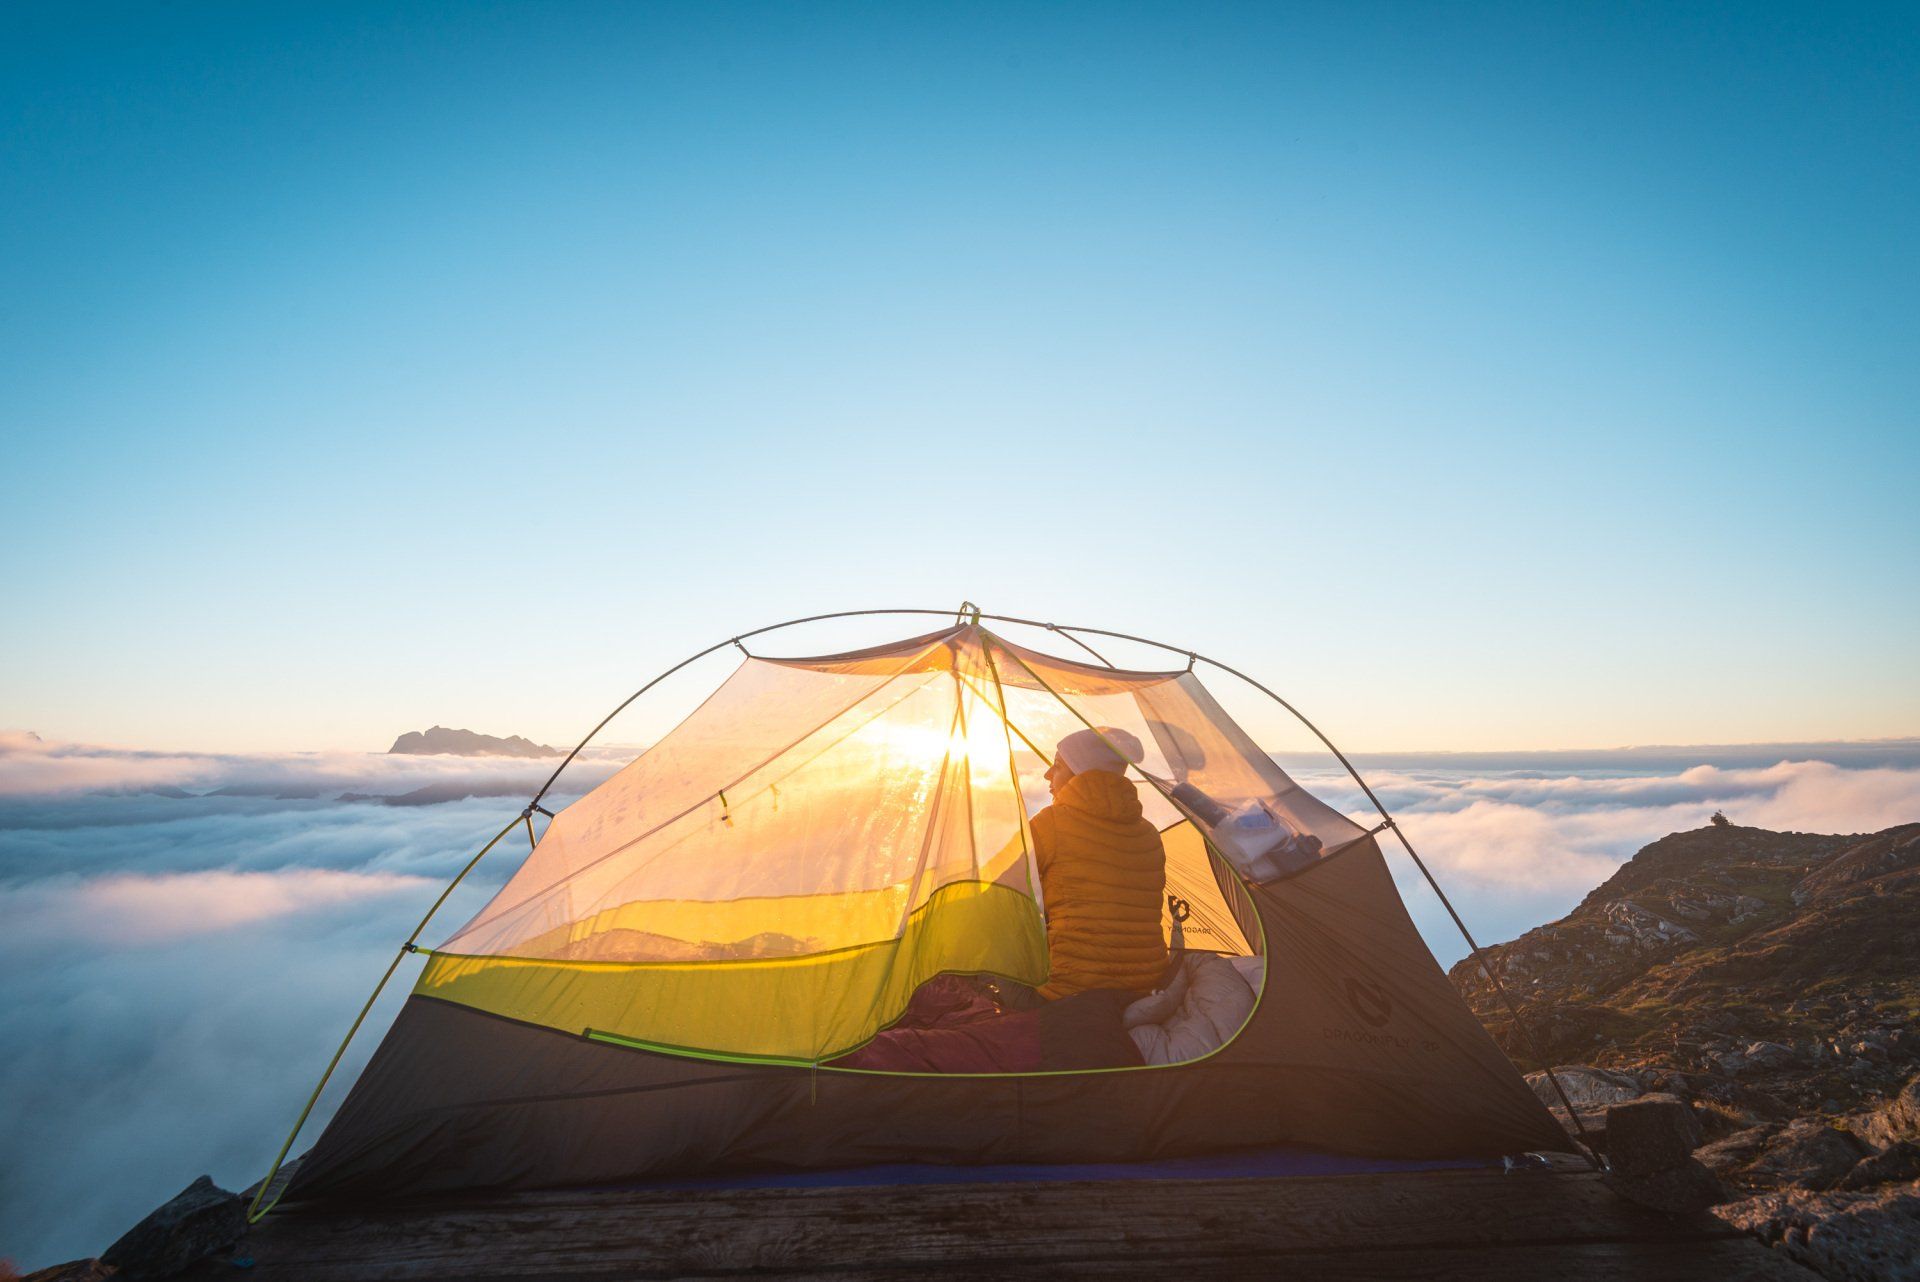 View of a tent, sunrise and cloud inversion on the Panorama Ridge at Golden Ears mountain, BC, Canada